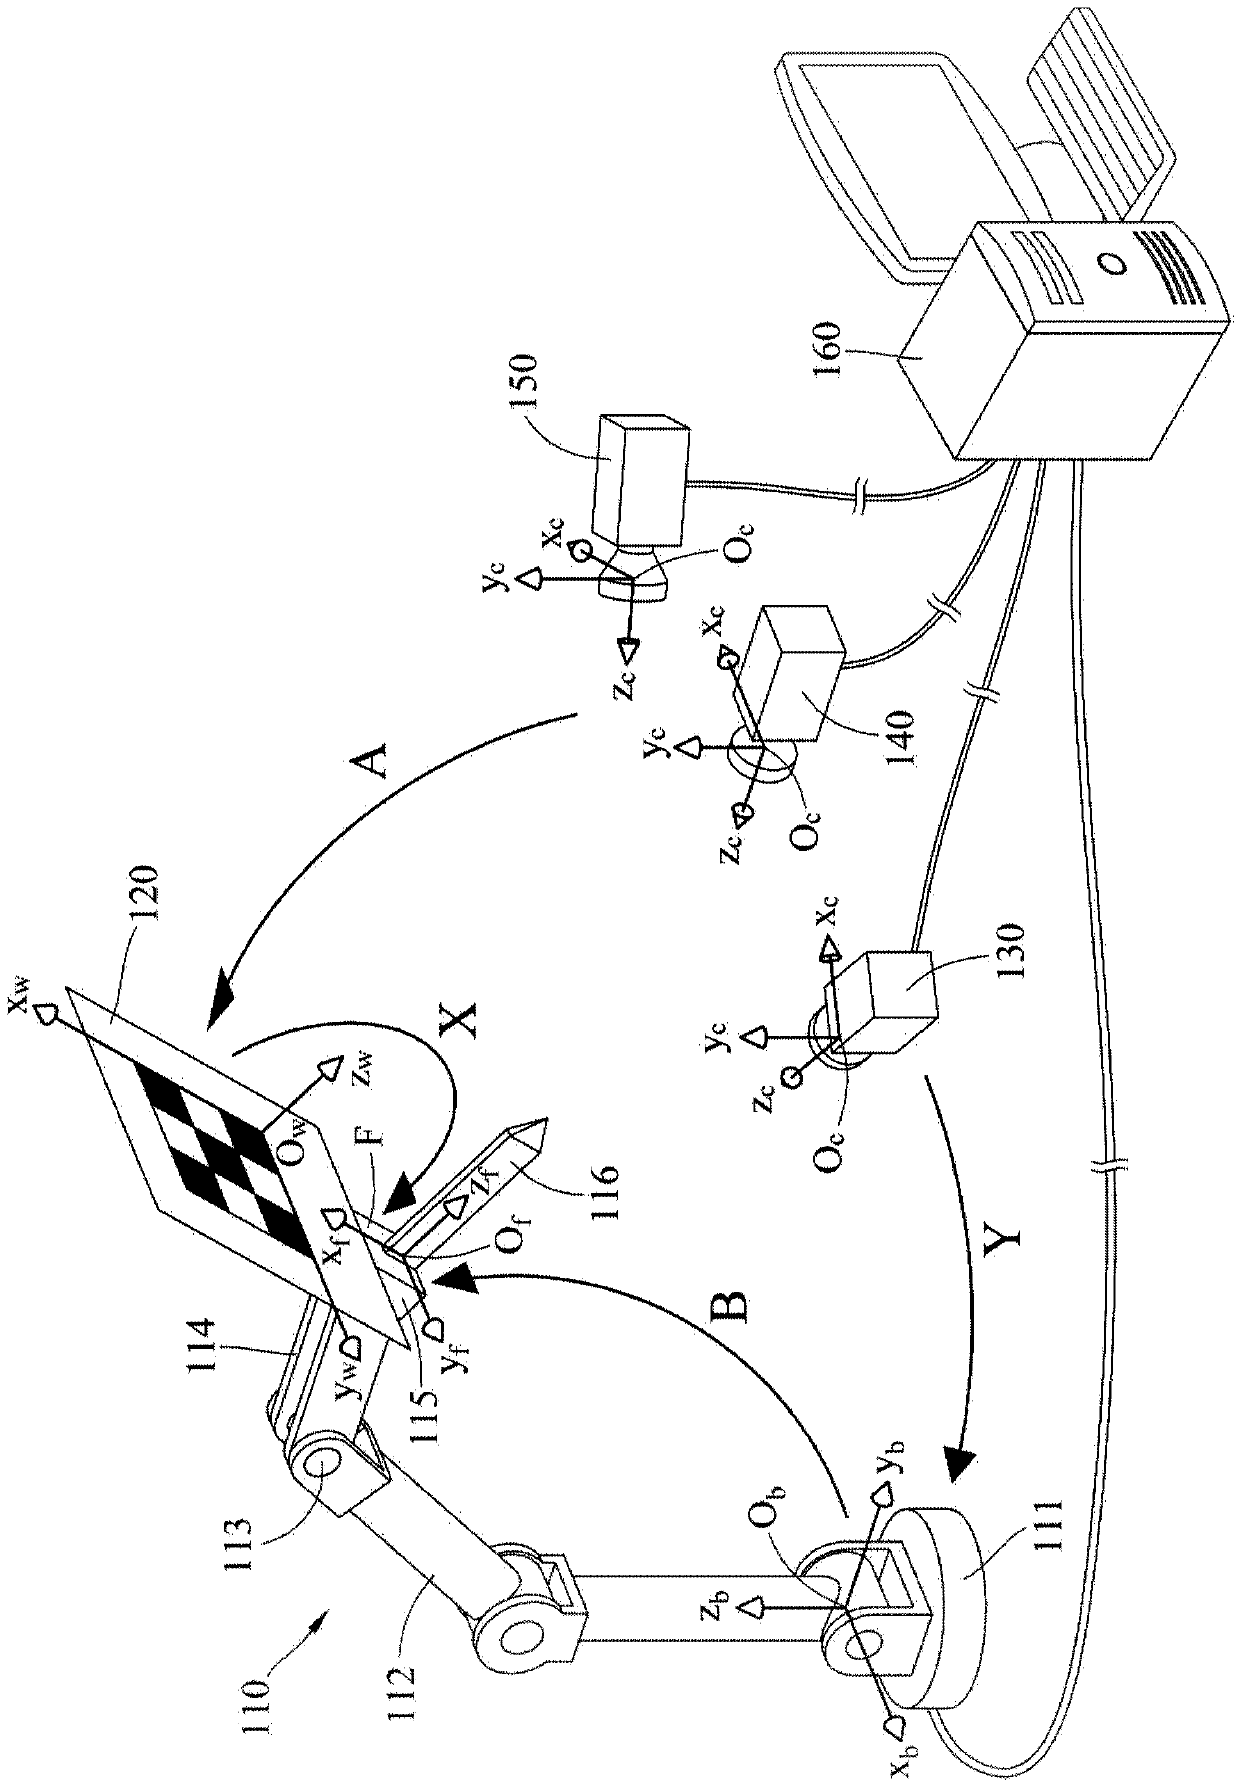 Method and apparatus of non-contact tool center point calibration for a mechanical arm, and a mechanical arm system with said calibration function